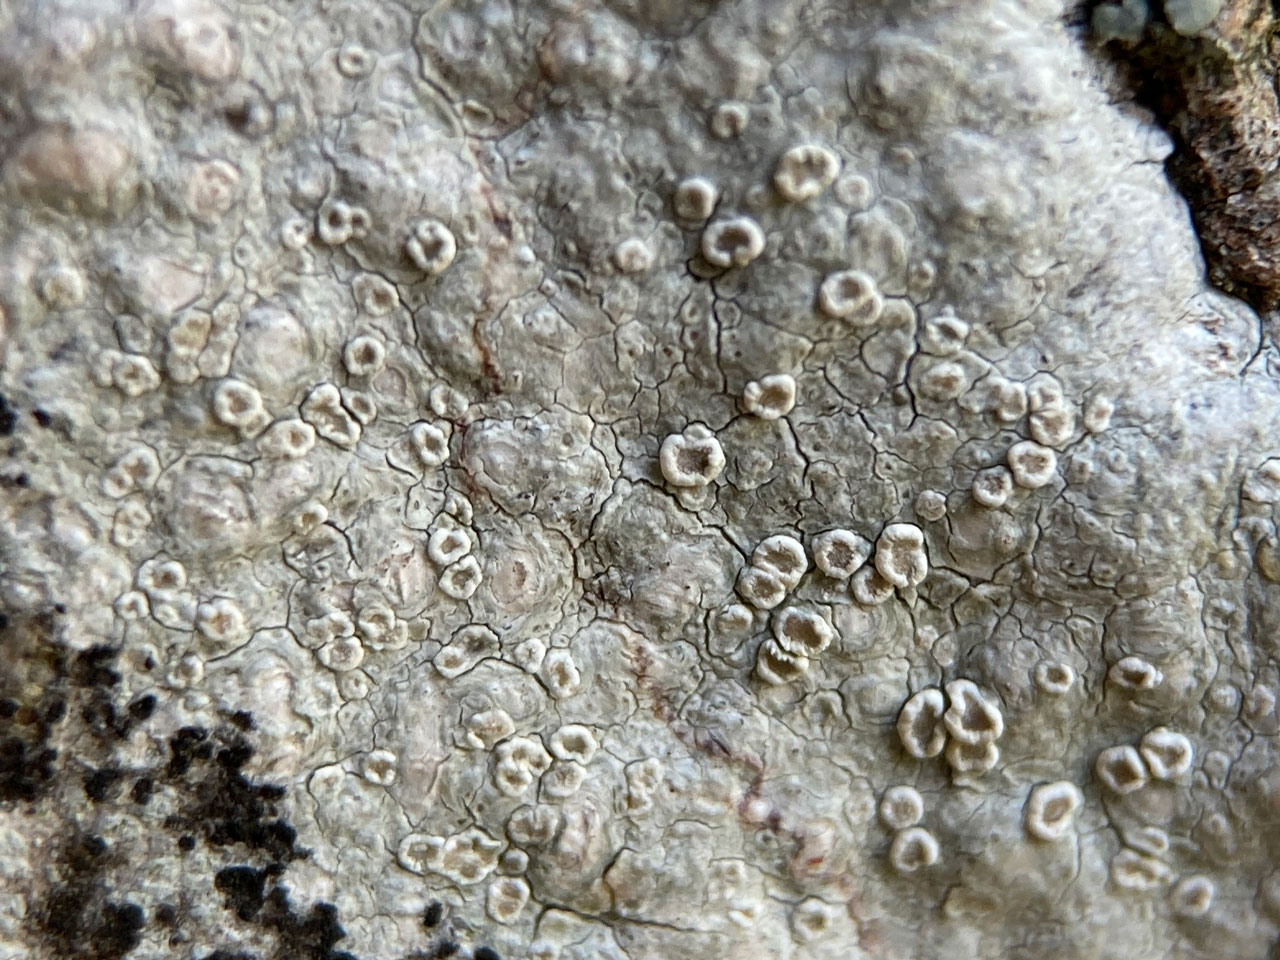 Lecanora intumescens, Brook Wood, New Forest